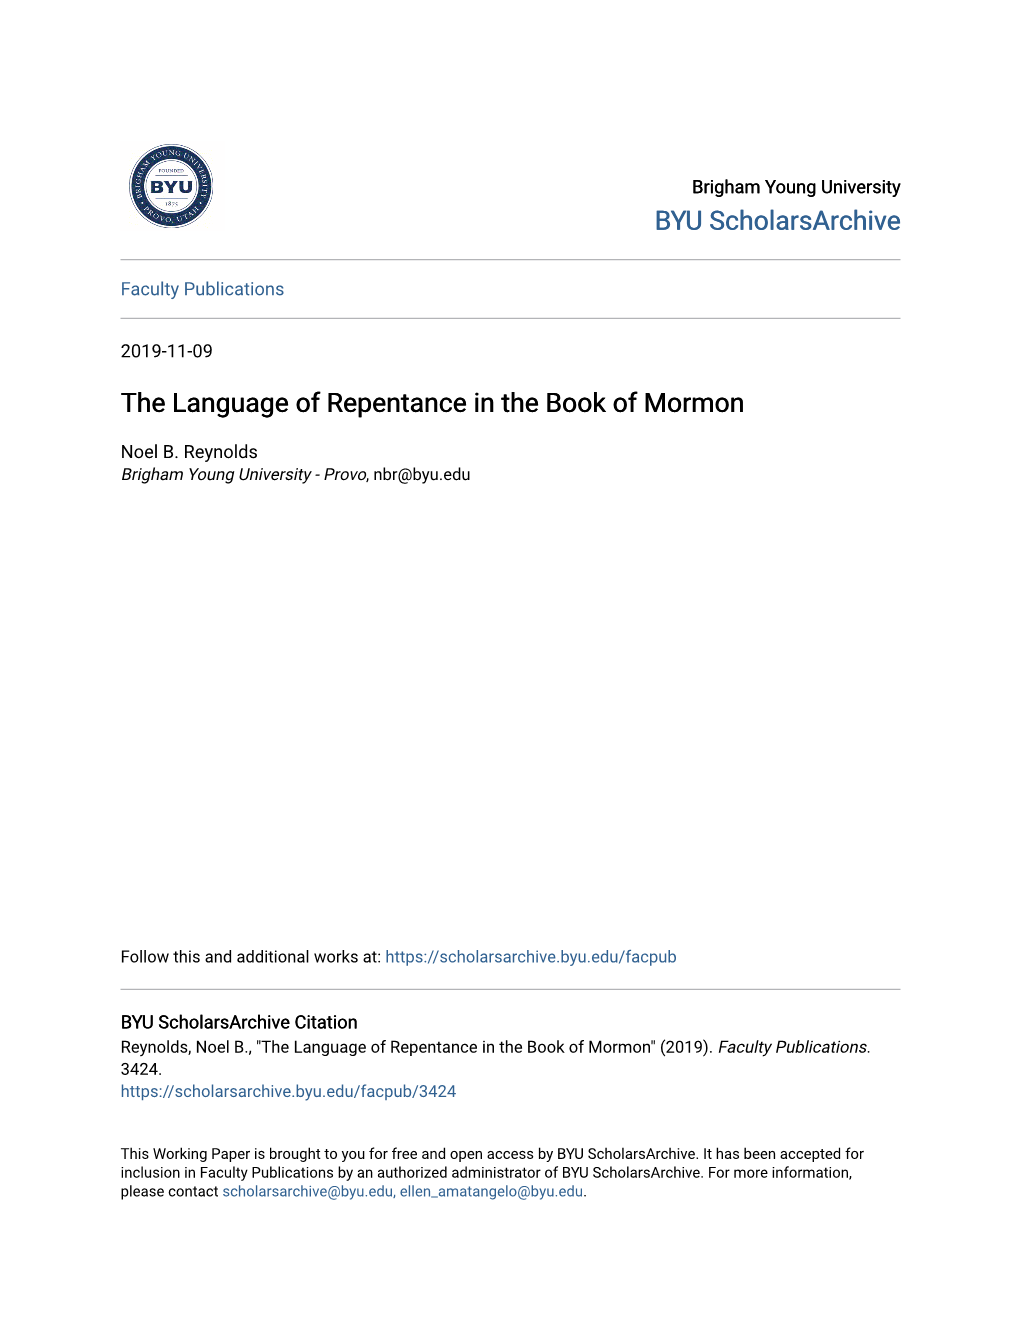 The Language of Repentance in the Book of Mormon